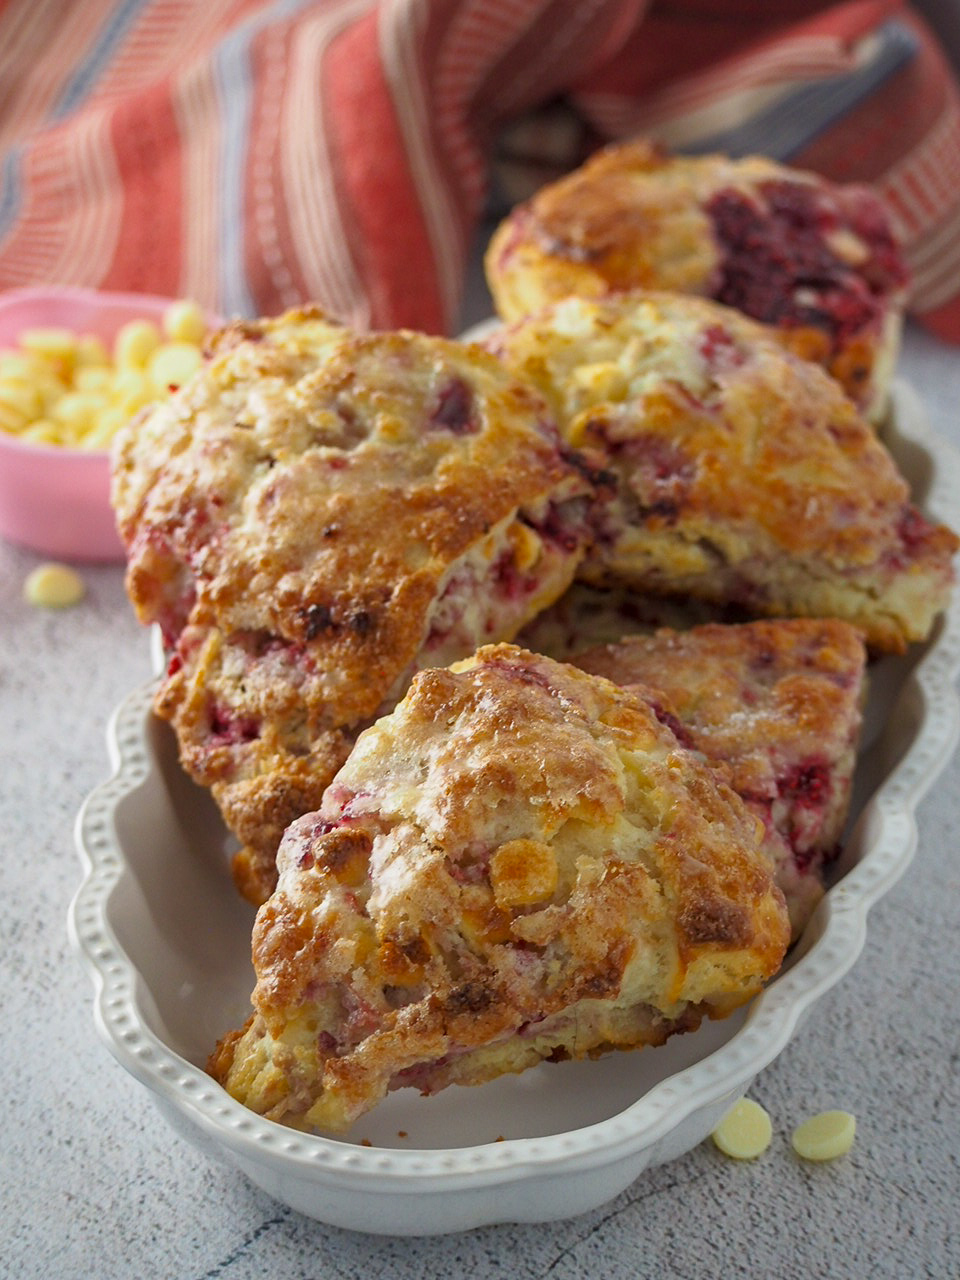 Raspberry scones on a serving plate.